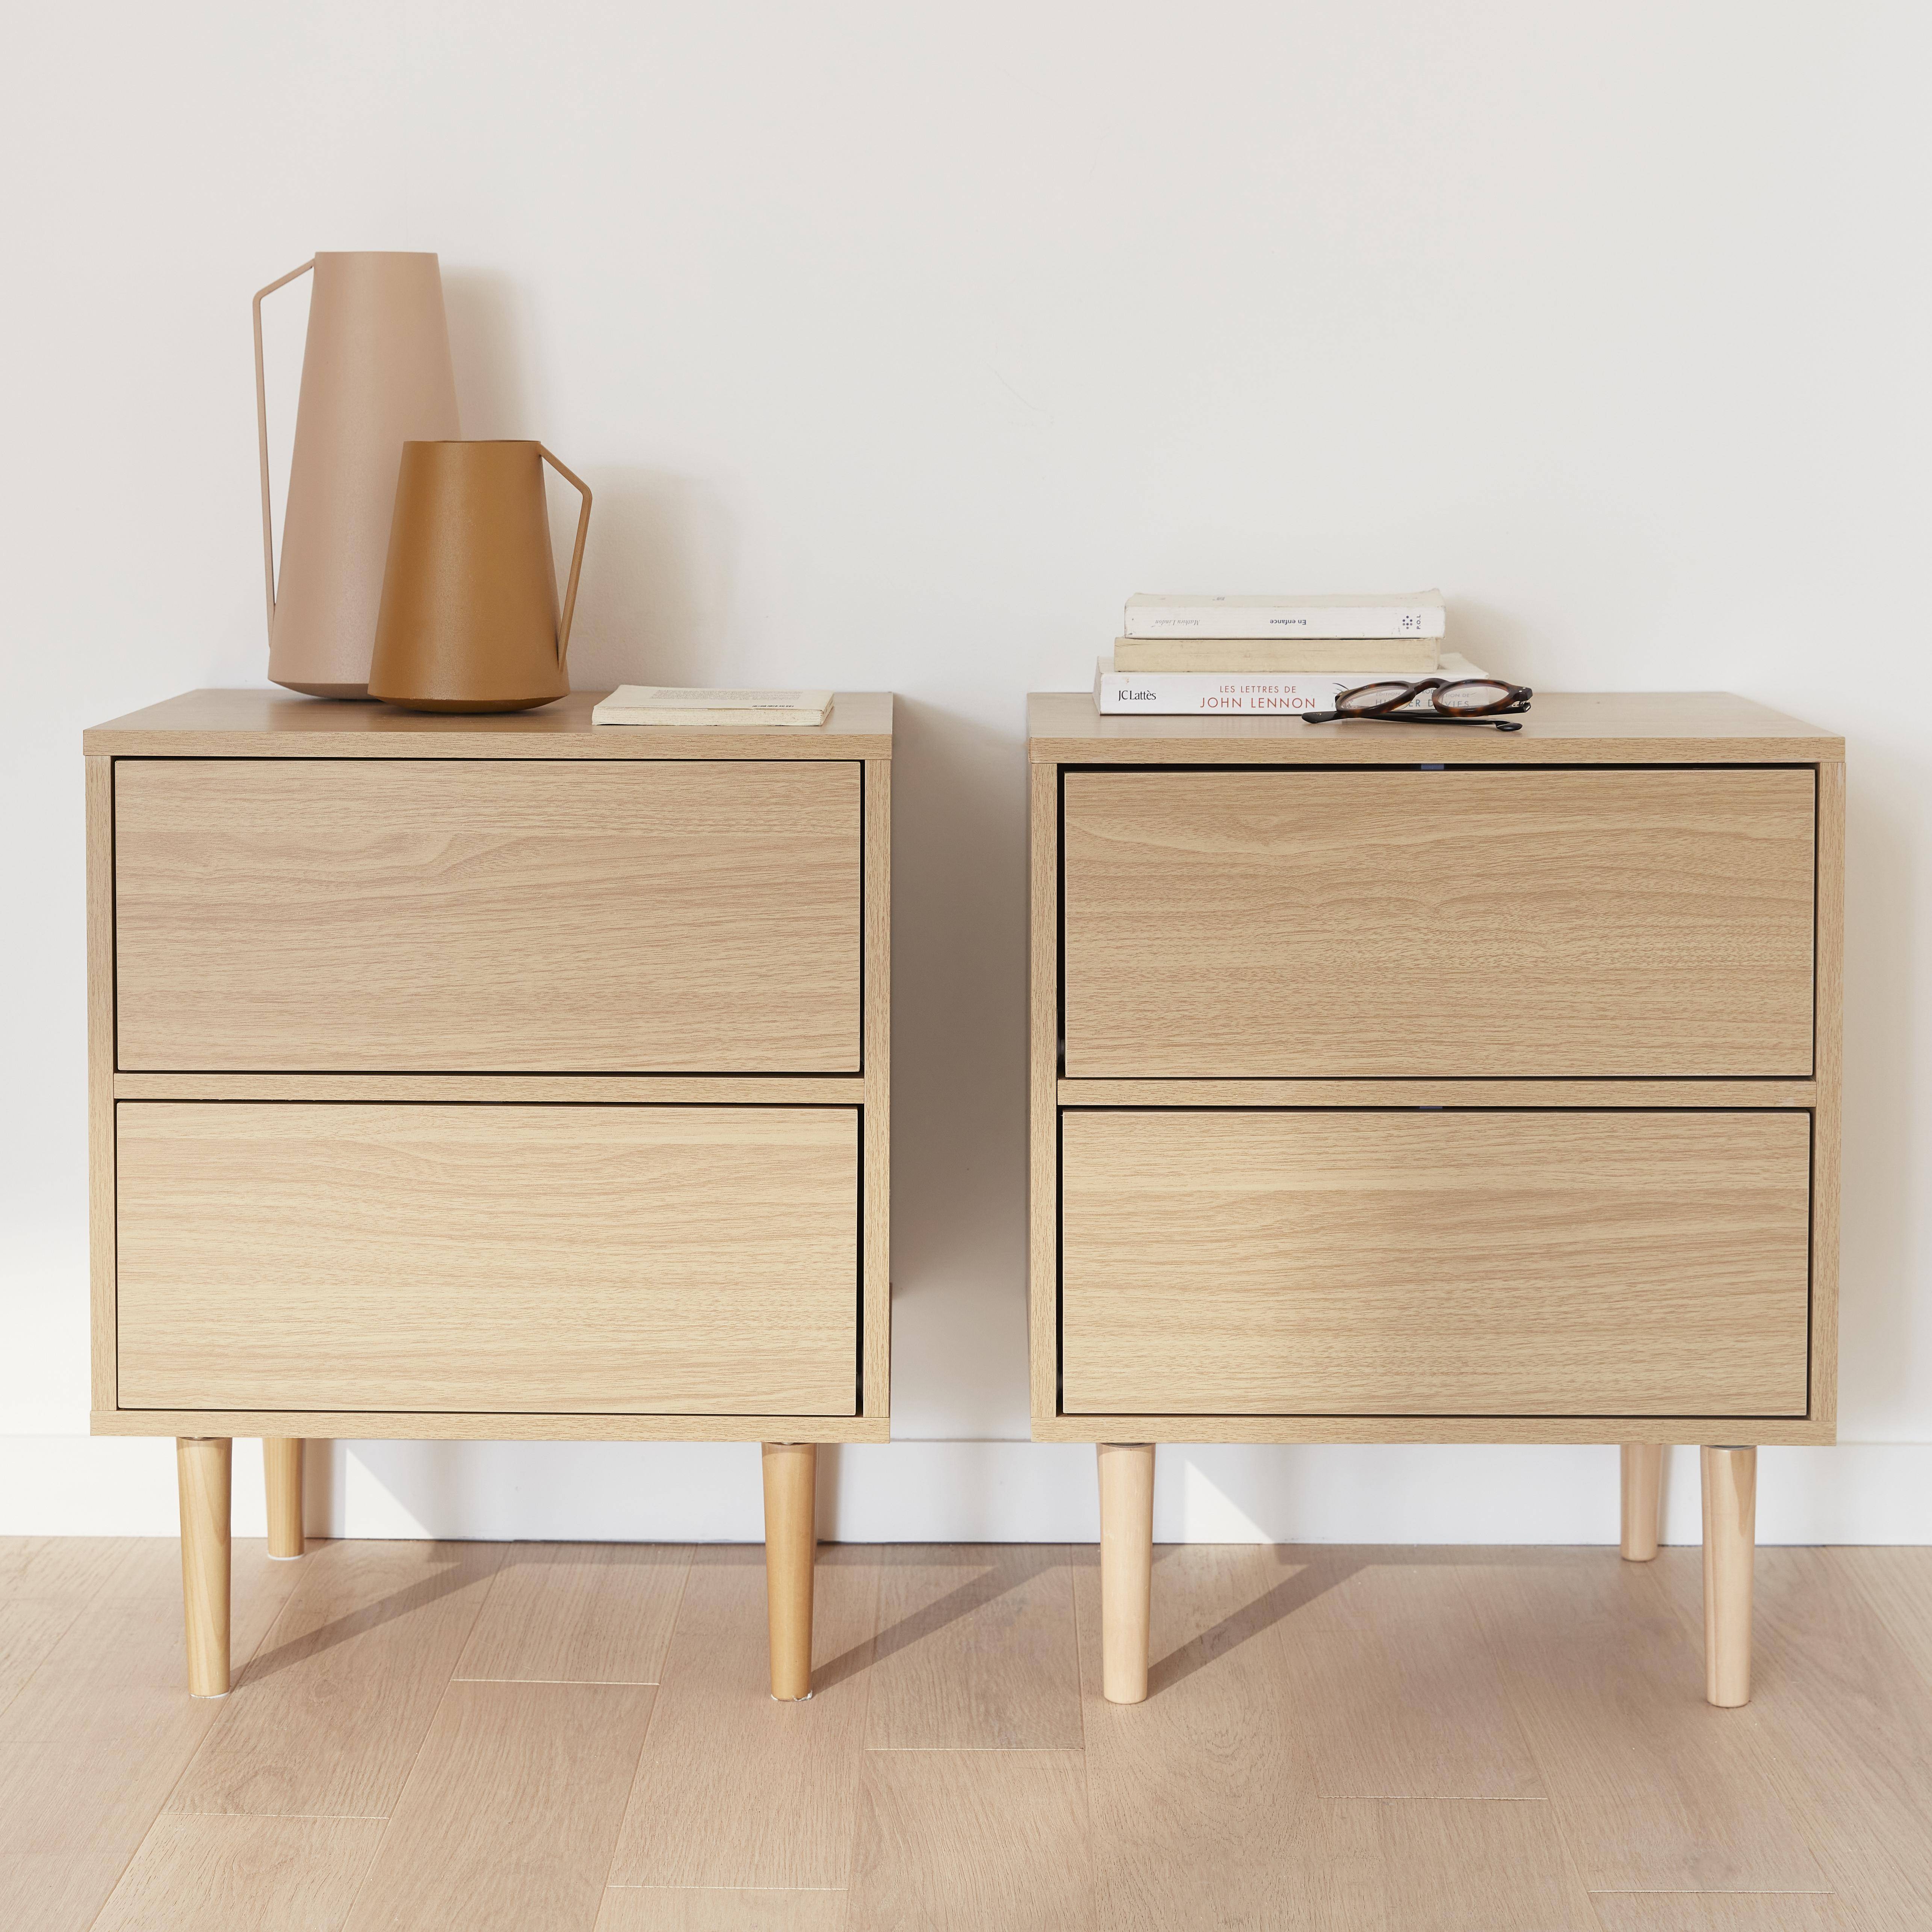 Pair of wood-effect bedside tables with two drawers, 48x40x59cm - Mika - Natural Wood,sweeek,Photo1